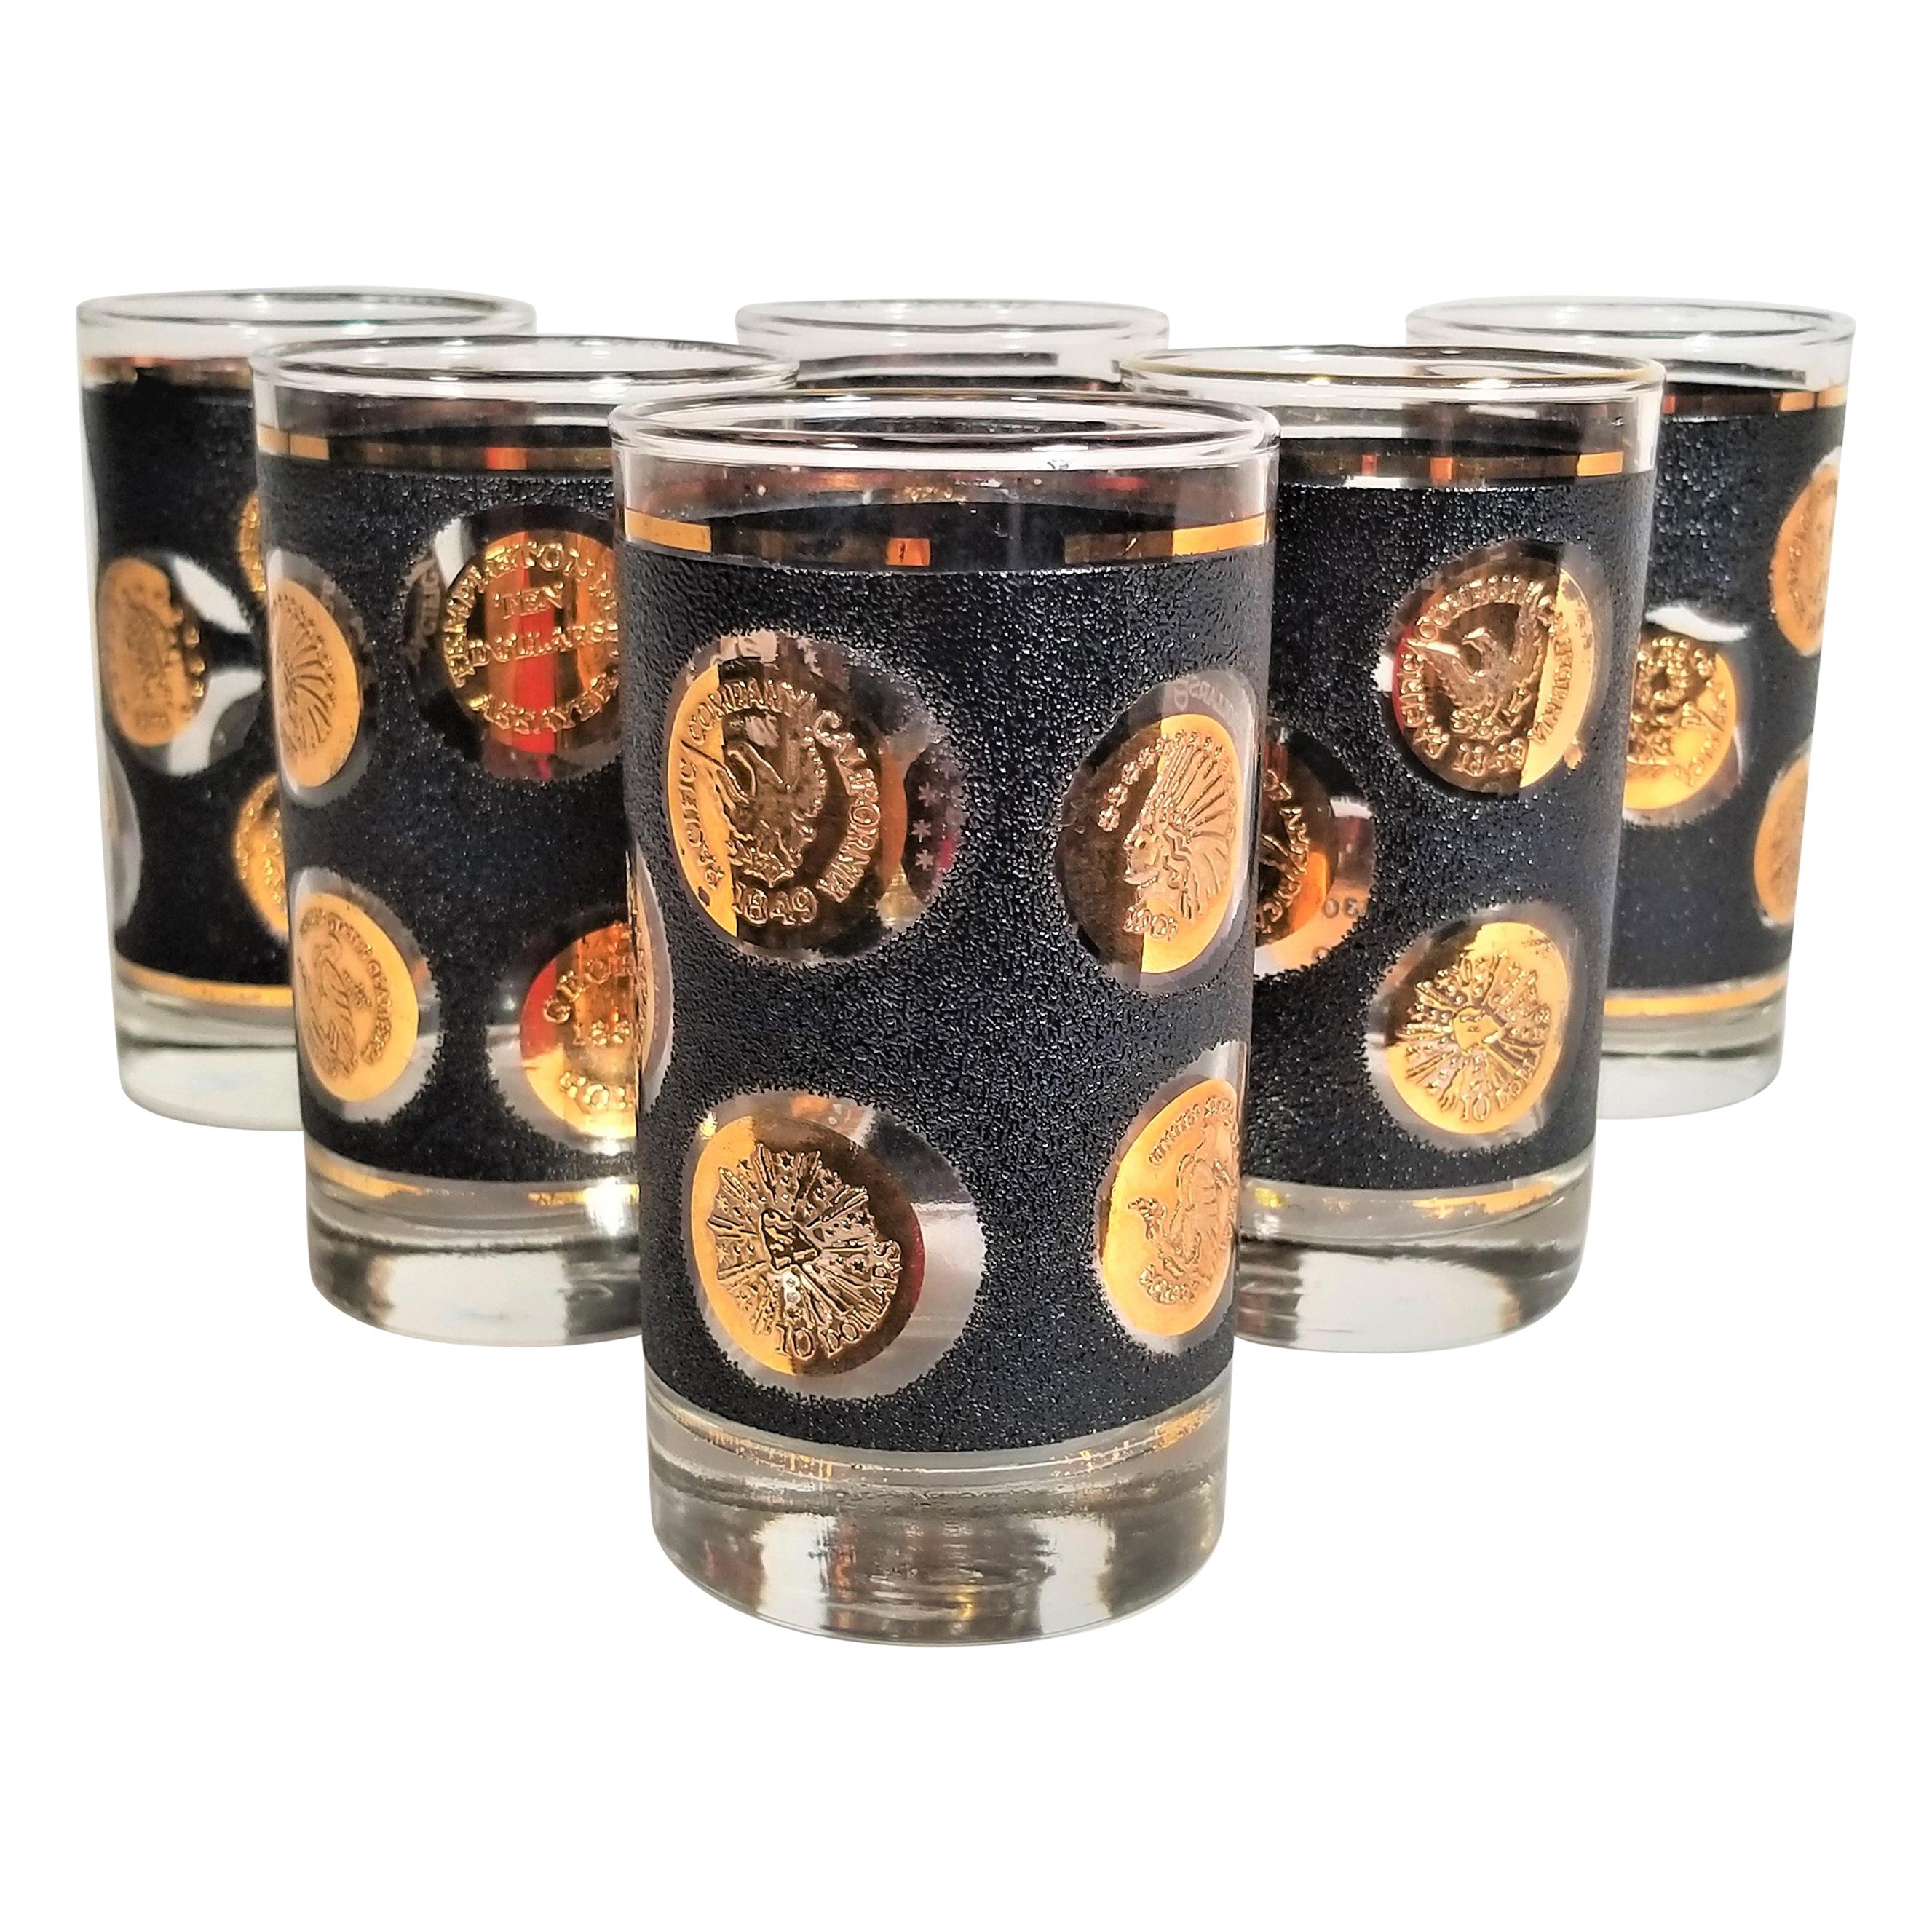 Libbey Midcentury 1960s Black and Gold Glassware Set of 6